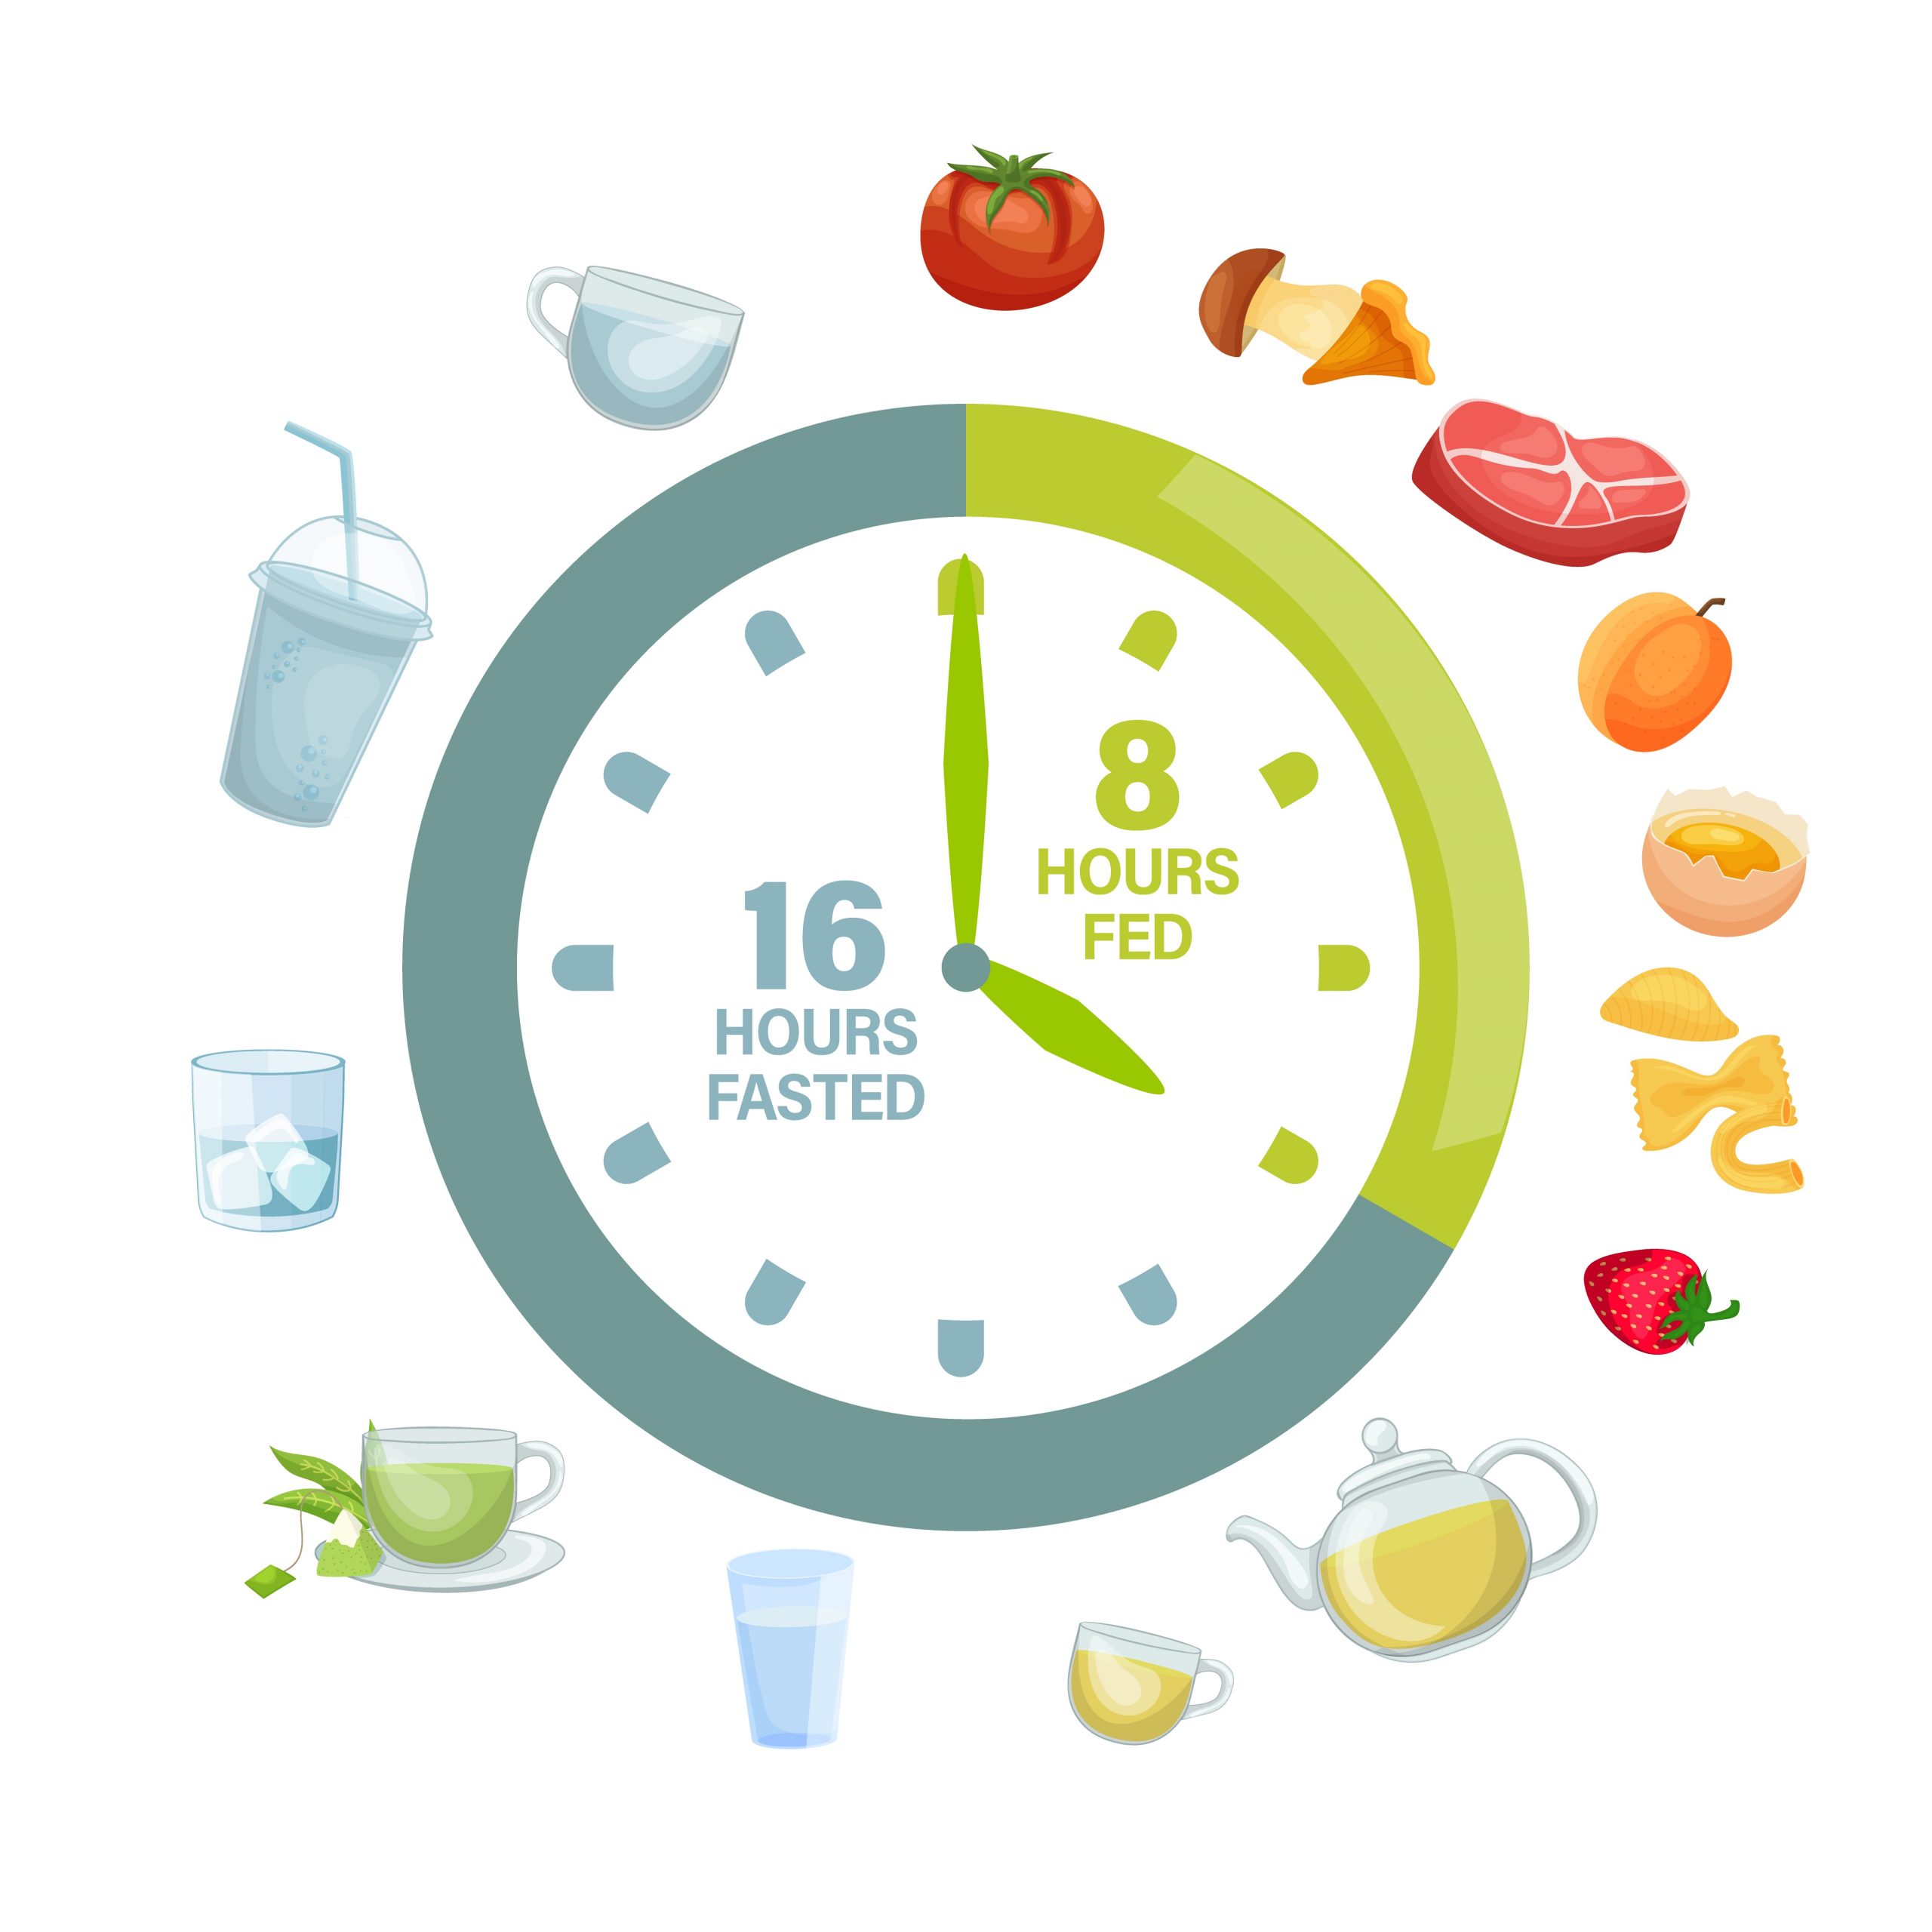 Is intermittent Fasting Good for Weight Loss?